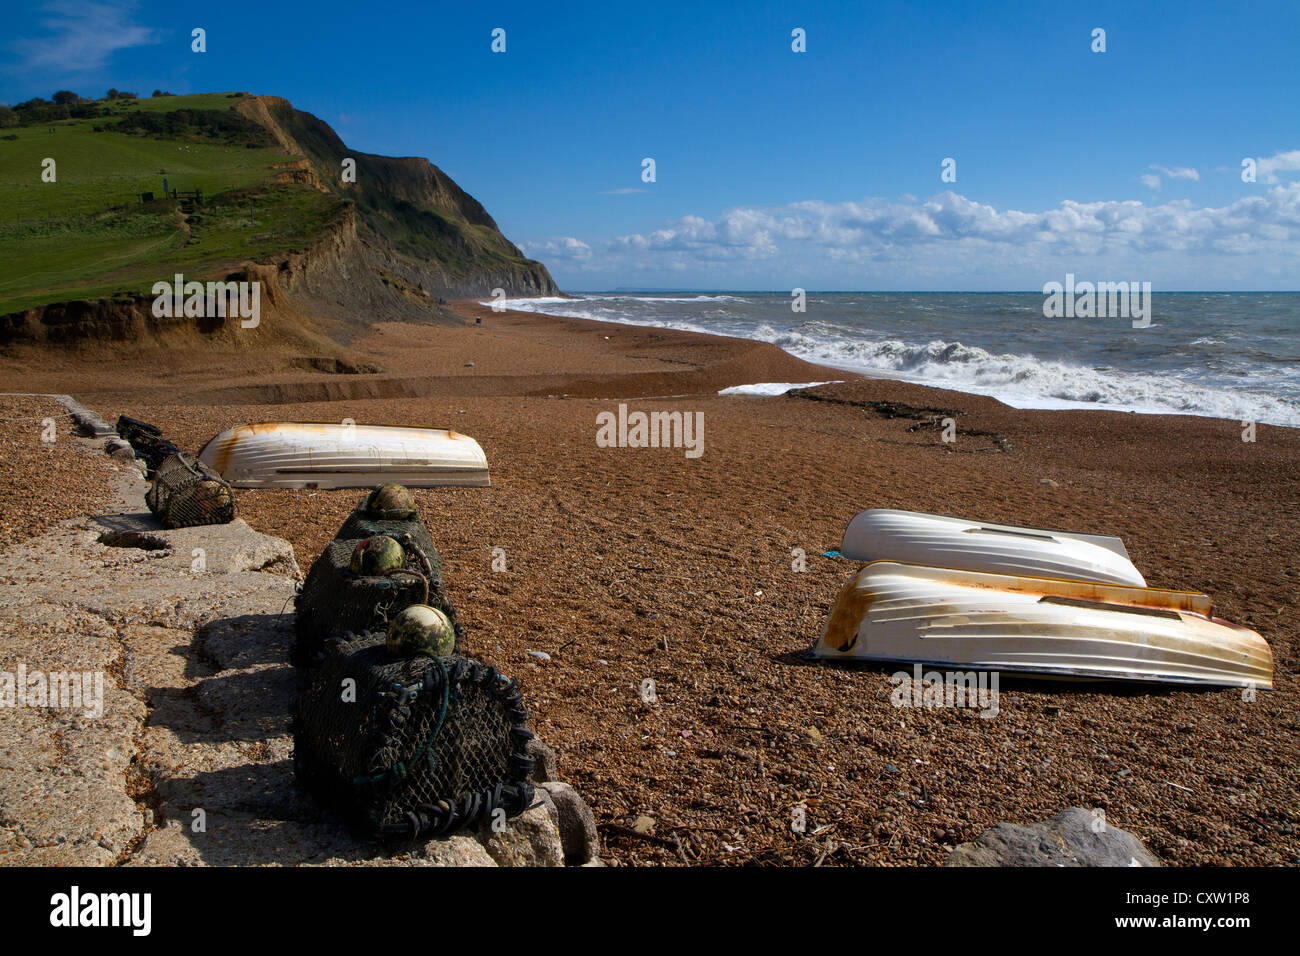 Seatown beach in Dorset, located between Bridport and Charmouth and on Jurassic Coast, a World Heritage Site. Stock Photo